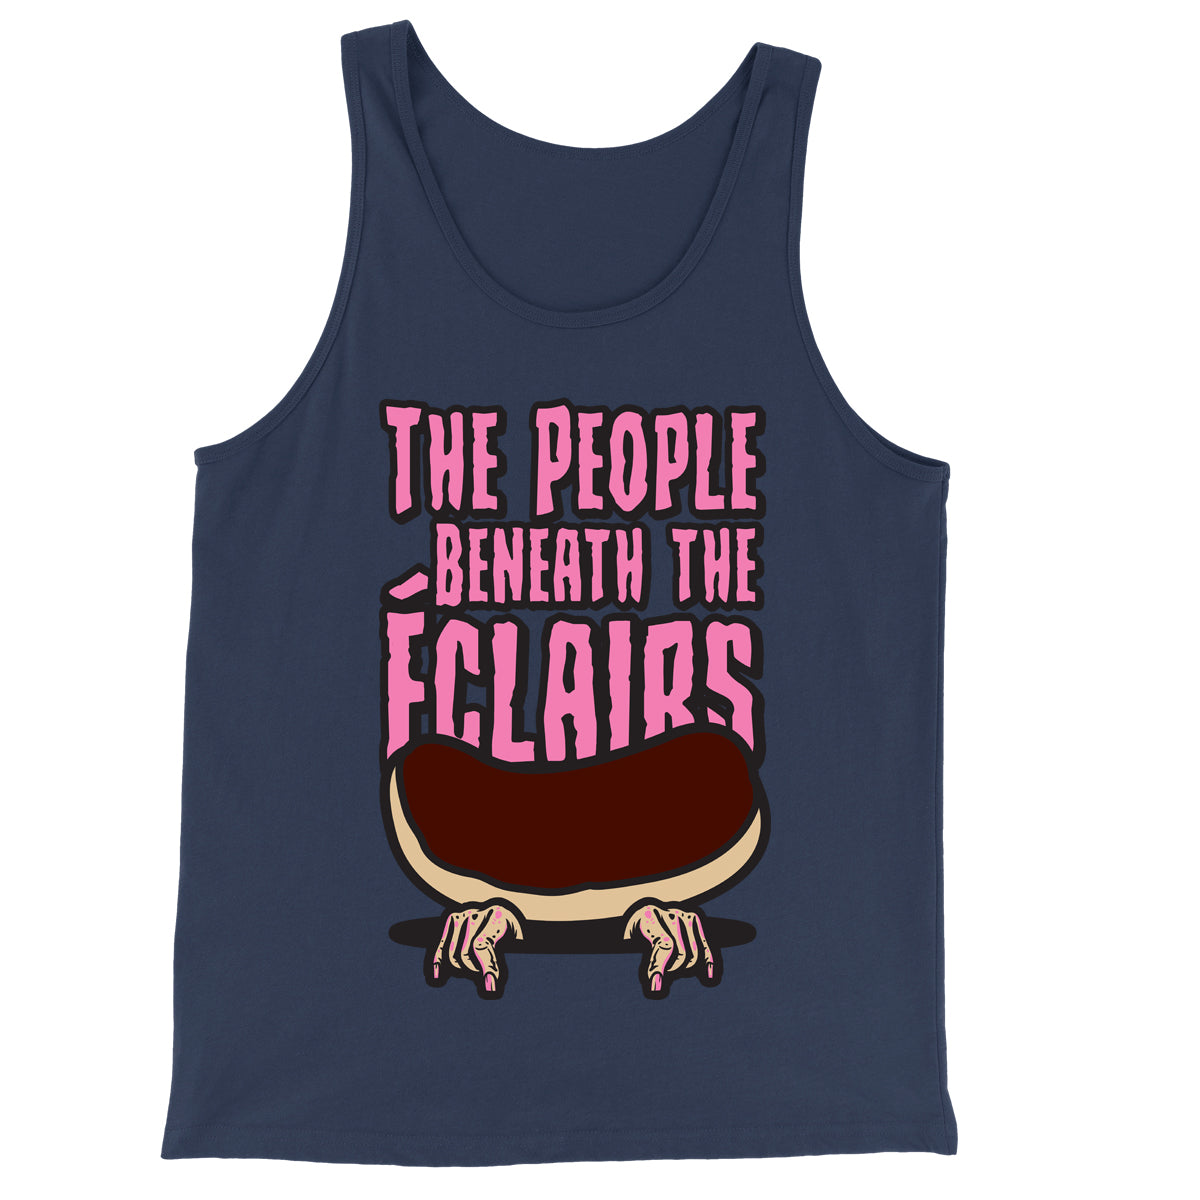 Movie The Food - The People Beneath The Eclairs Tank Top - Navy